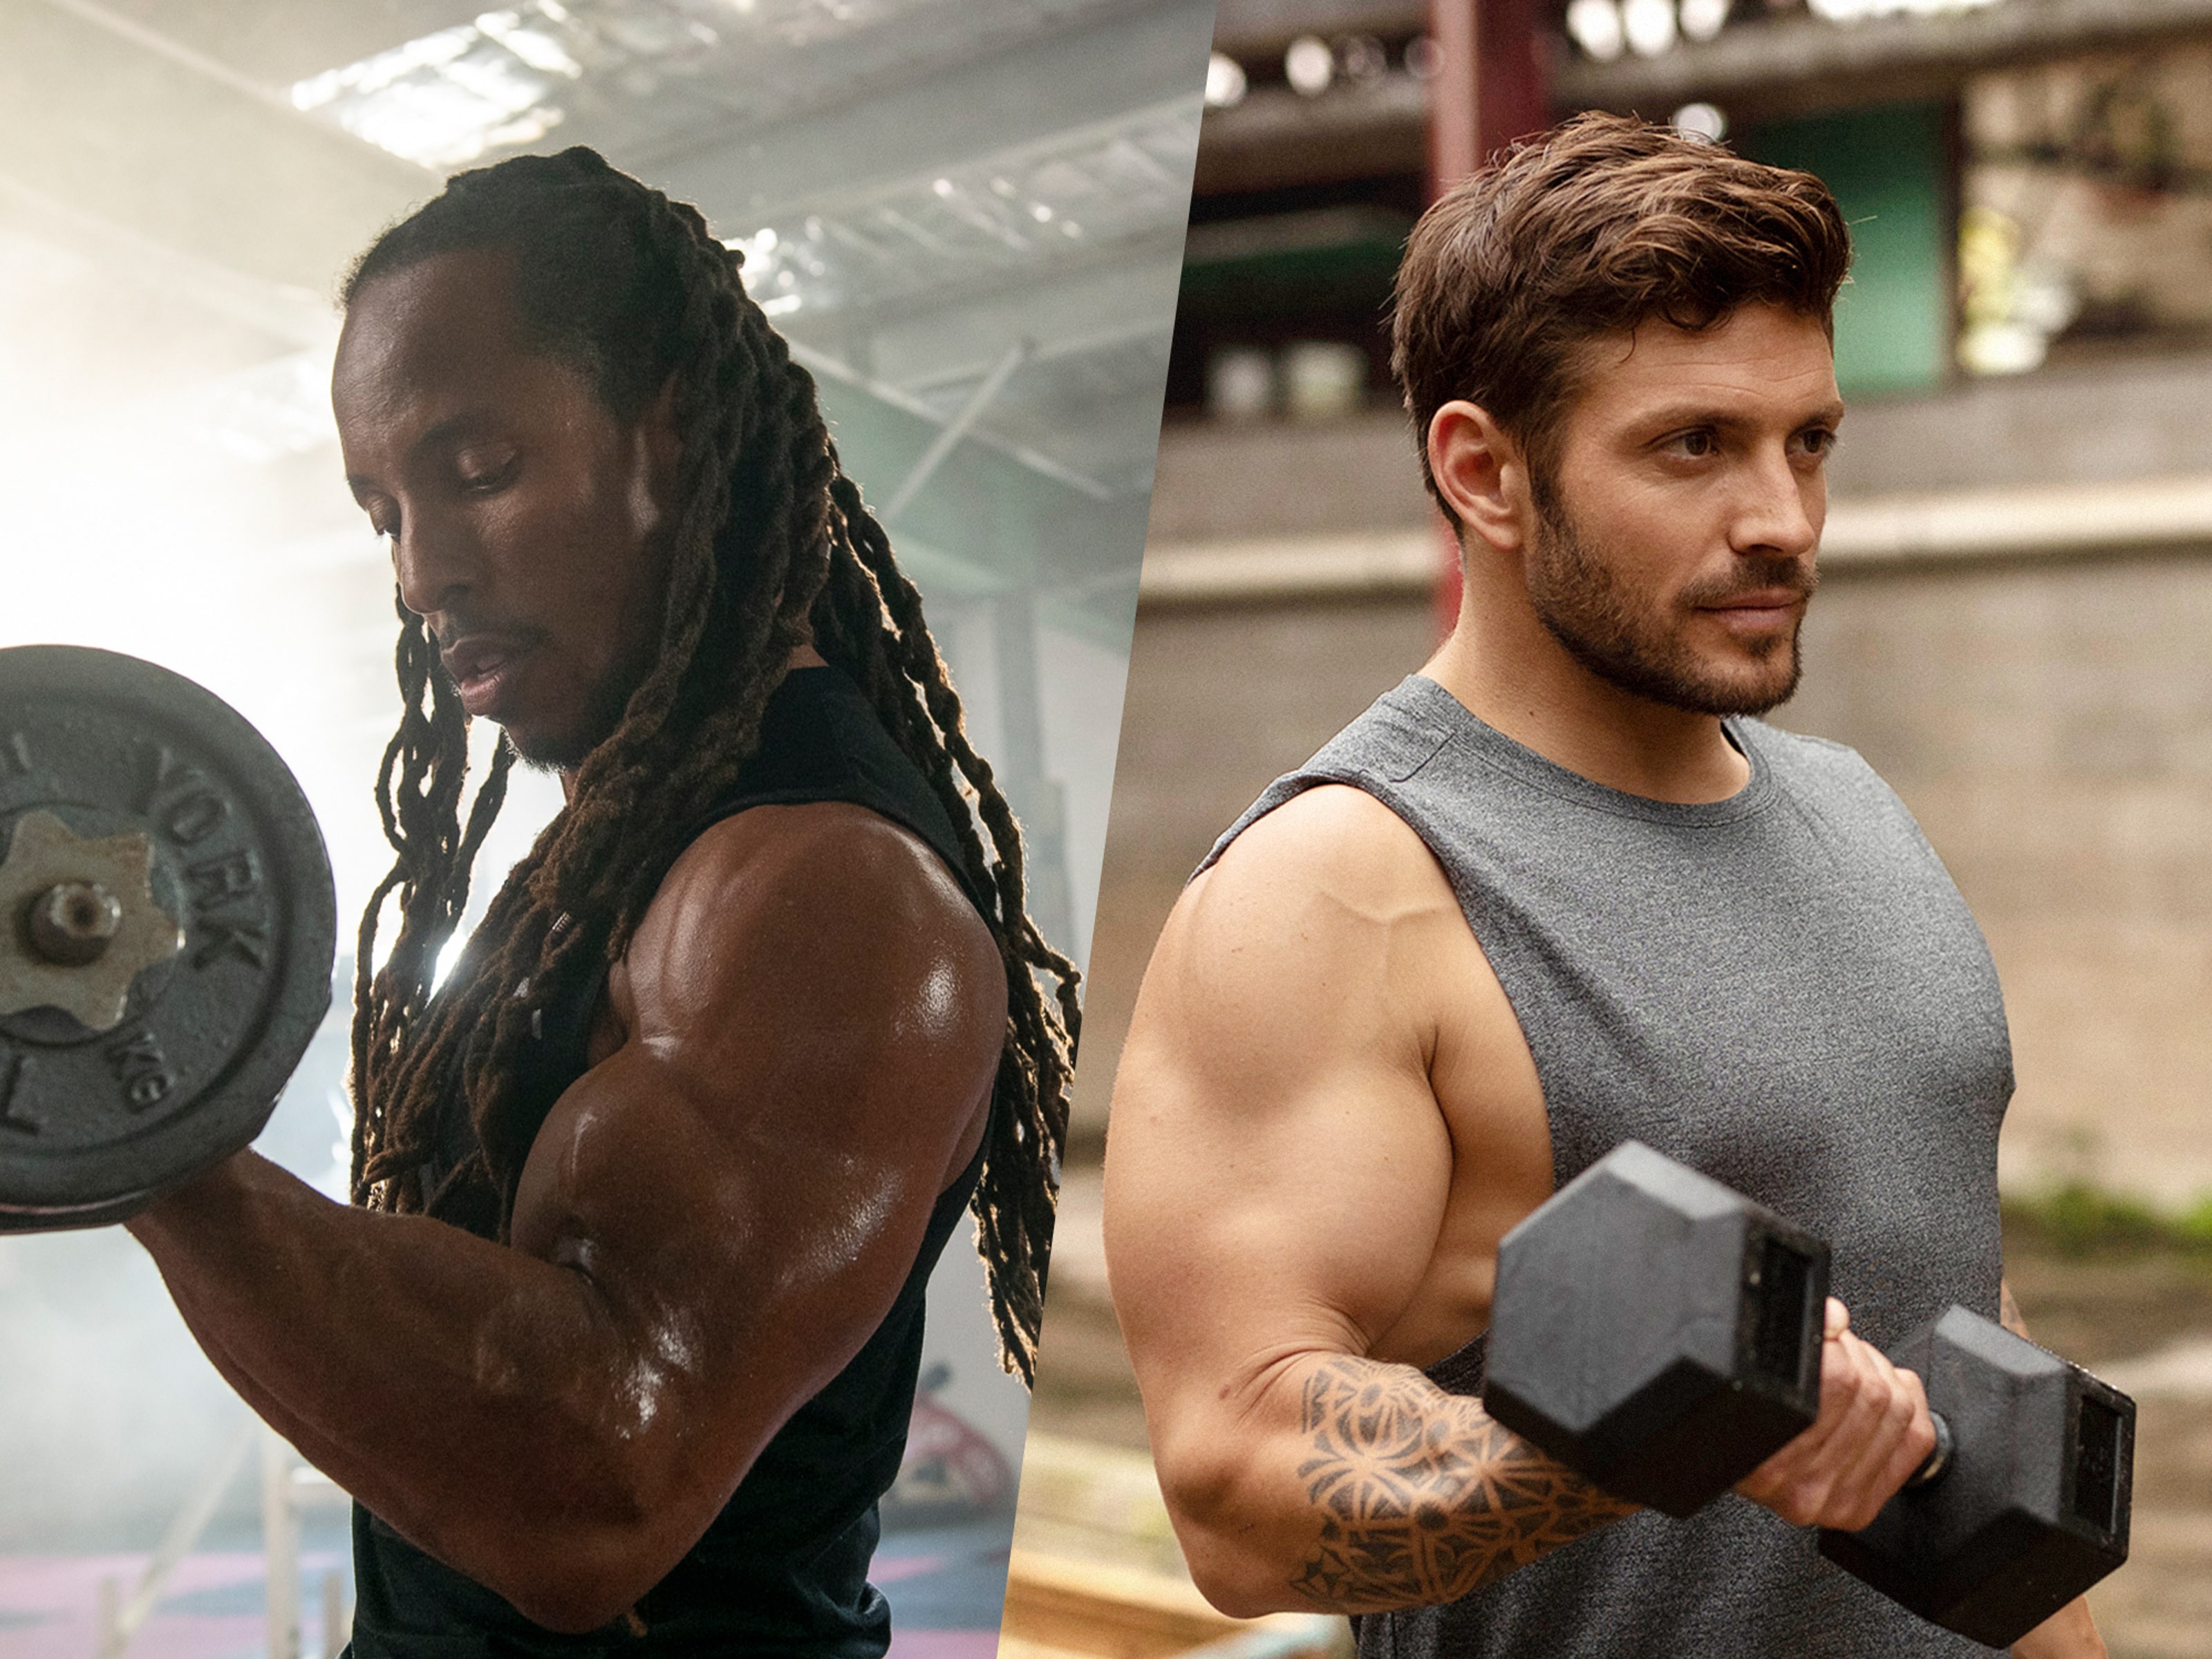 Everything you need to know about building muscle mass